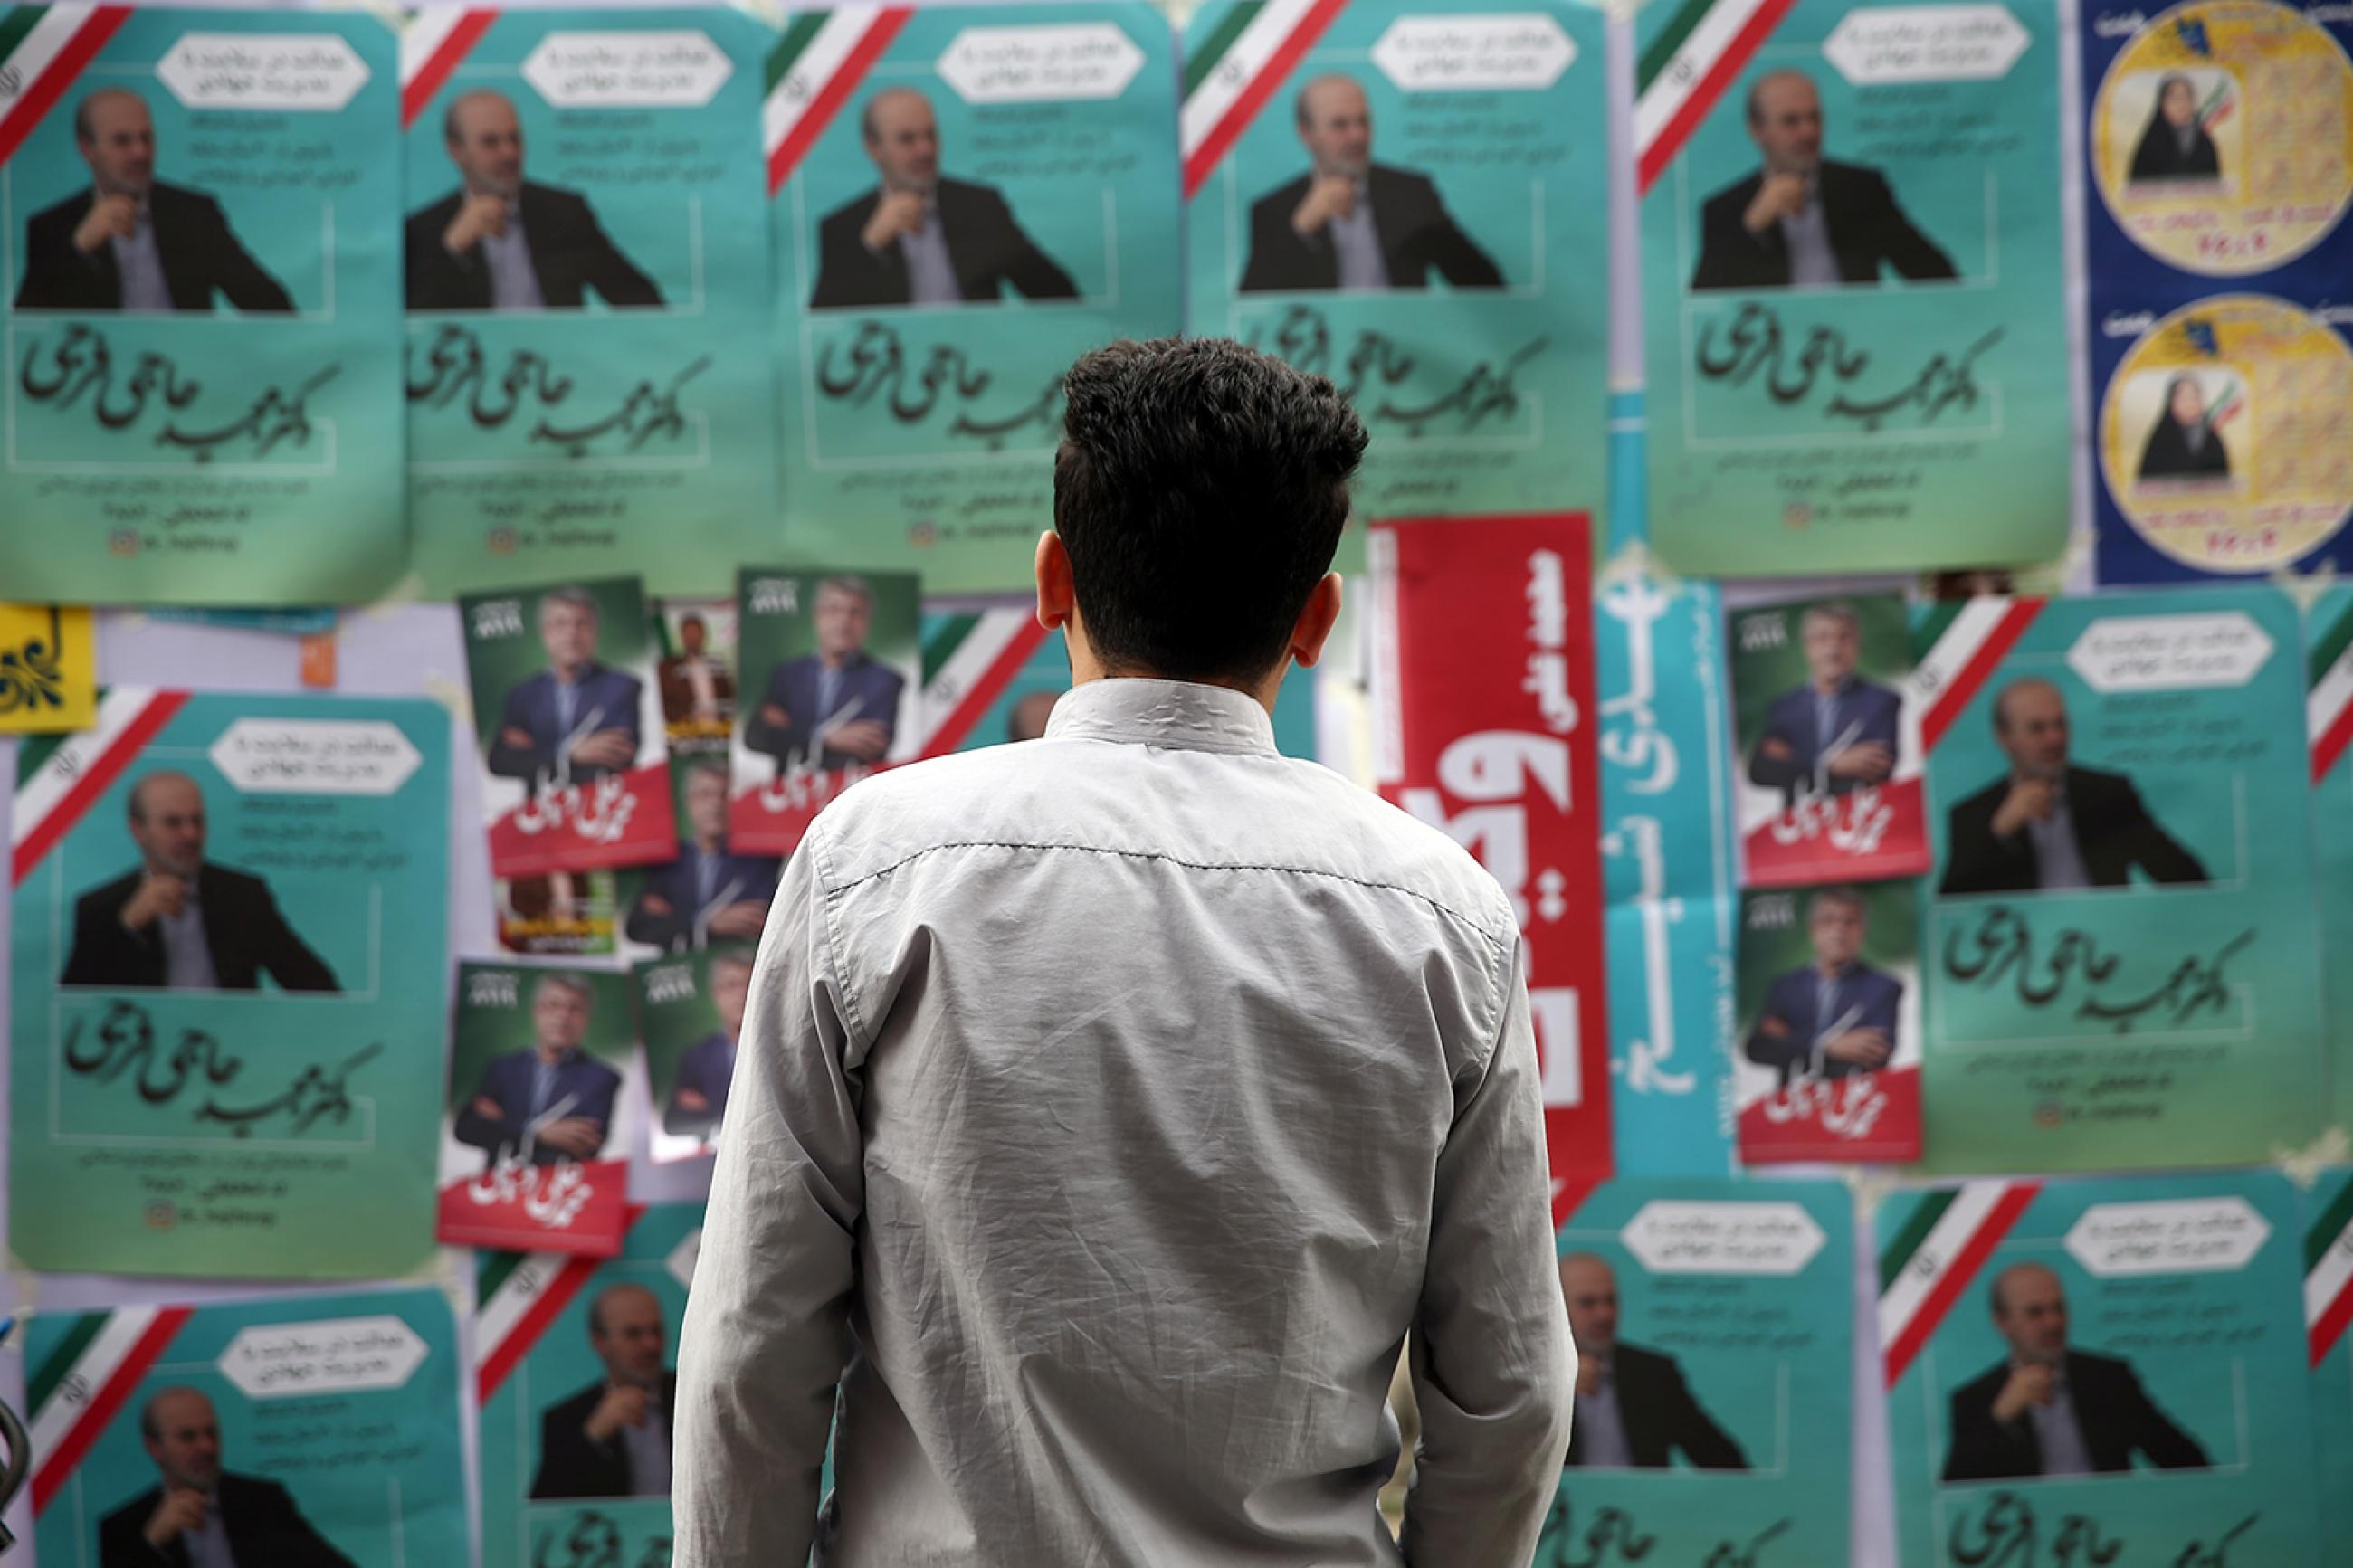 A man looks at parliamentary election campaign posters in Tehran, Iran on February 19, 2020. The photo shows the man standing in front of a board that is placarded with multiple political campaign posters, many of them identical and pasted over and over. The predominant colors are green, white, and red—like the Iranian flag. WANA/Nazanin Tabatabaee via REUTERS.